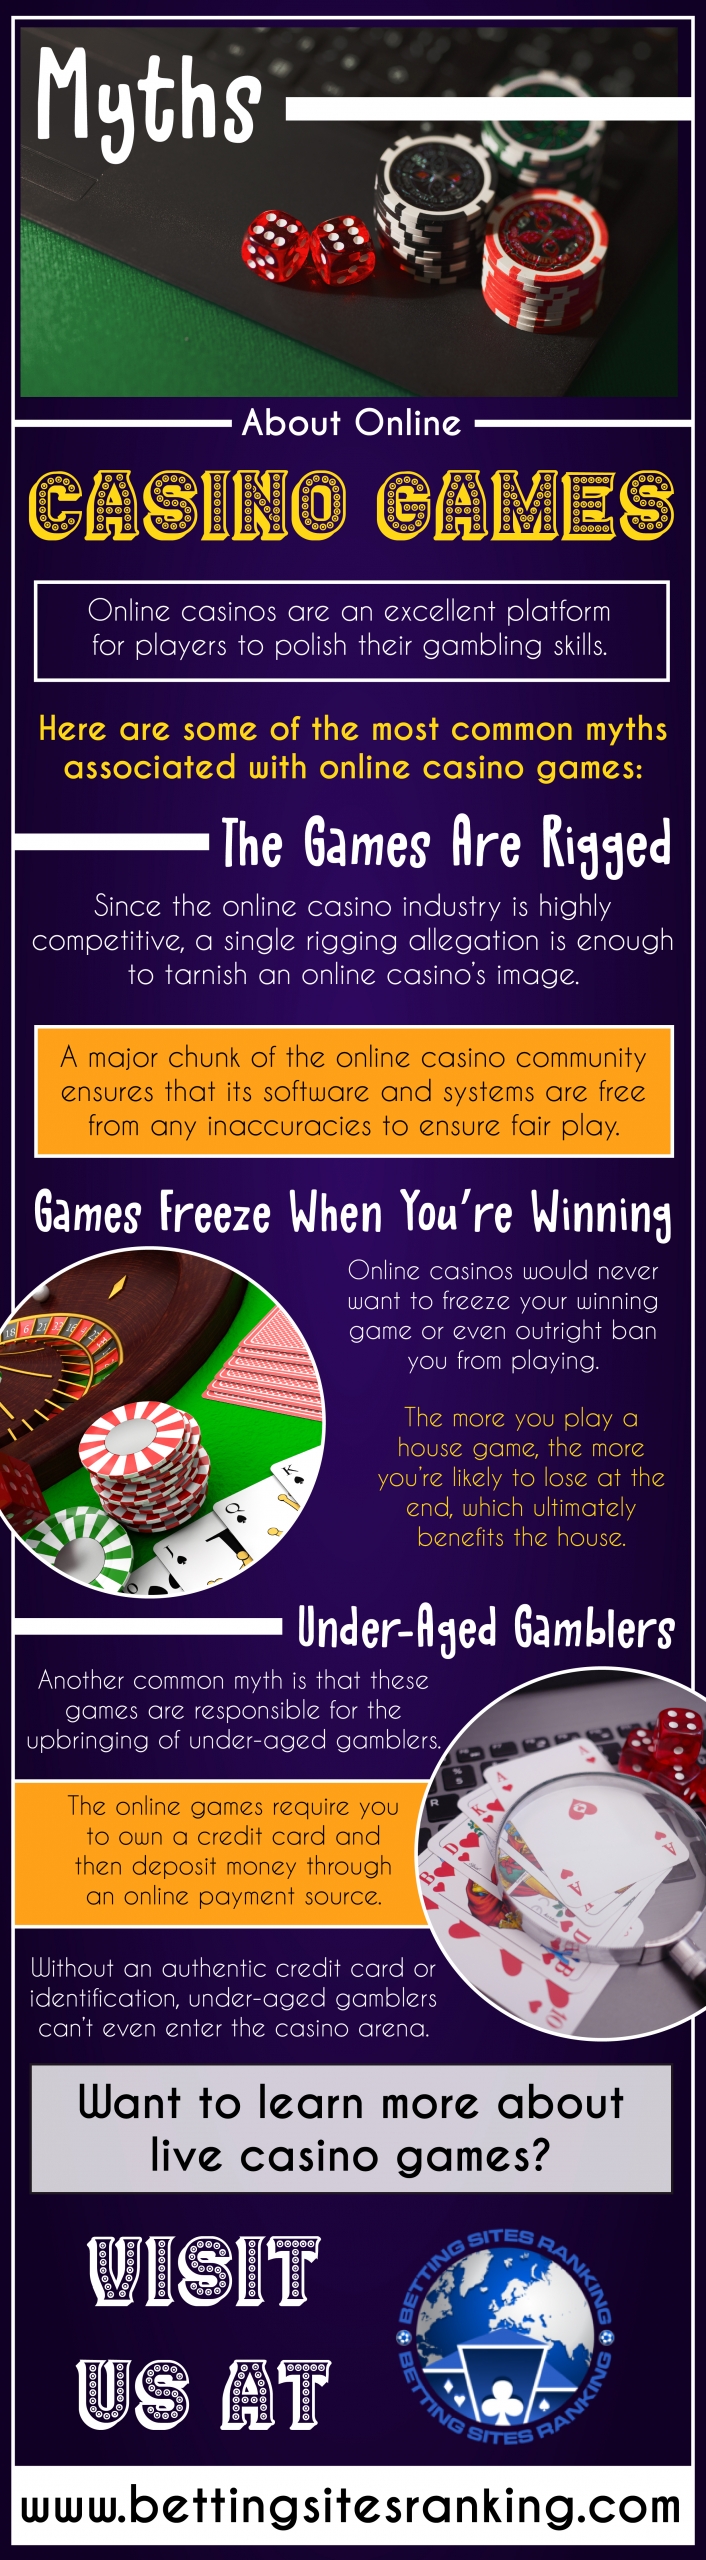 Myths-About-Online-Casino-Games